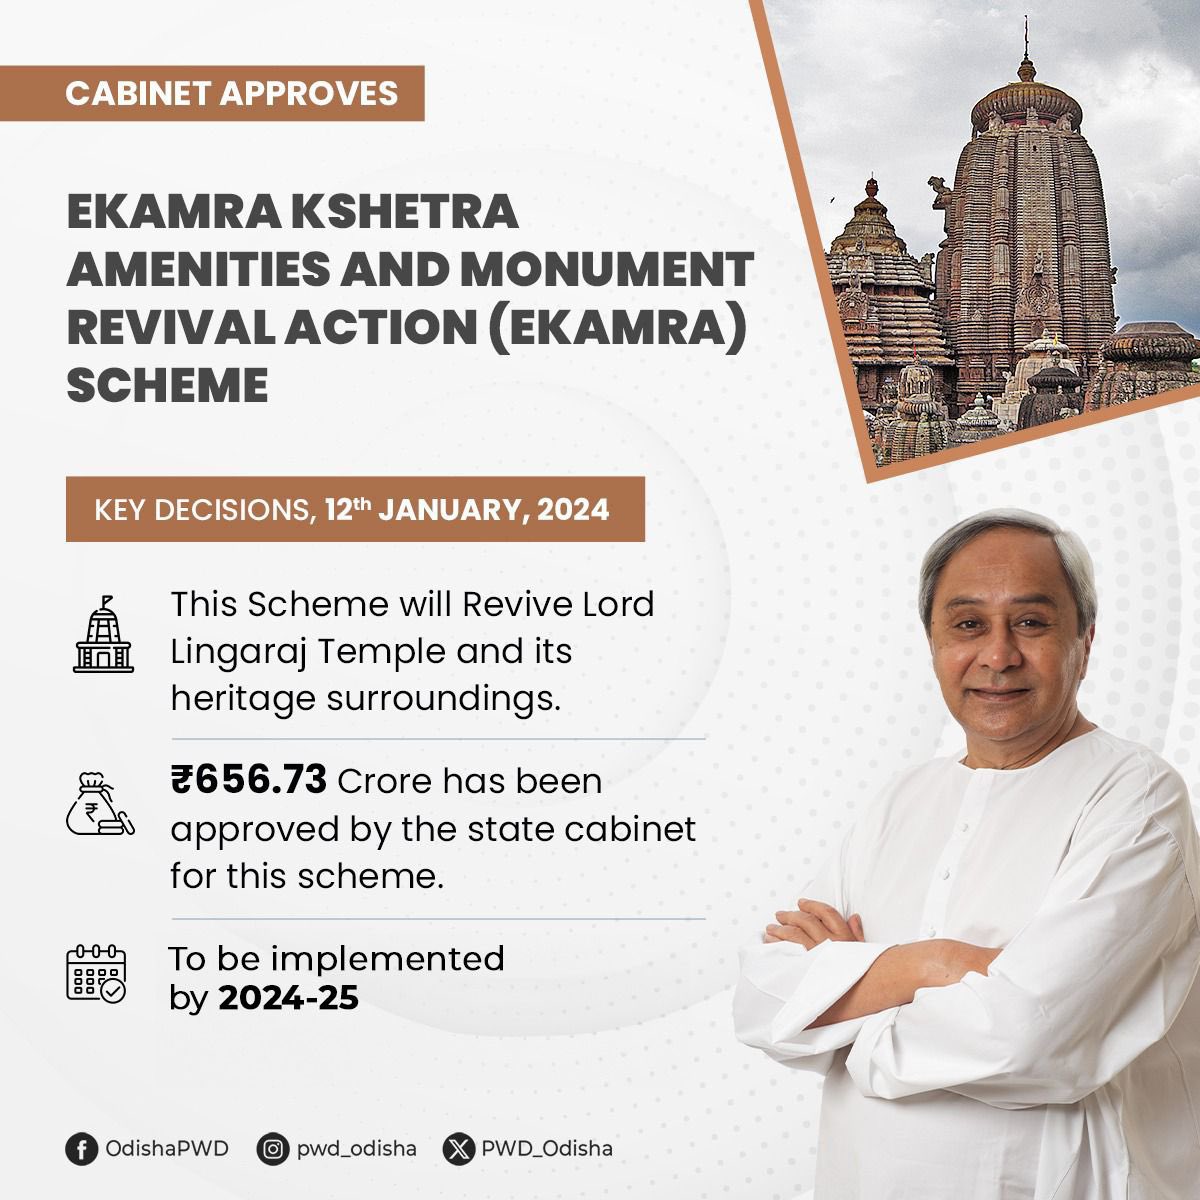 #OdishaCabinet, led by the Hon’ble CM Shri @Naveen_Odisha, has approved Rs. 656.73 Crore for the #EKAMRA Scheme proposed by the Works Department.